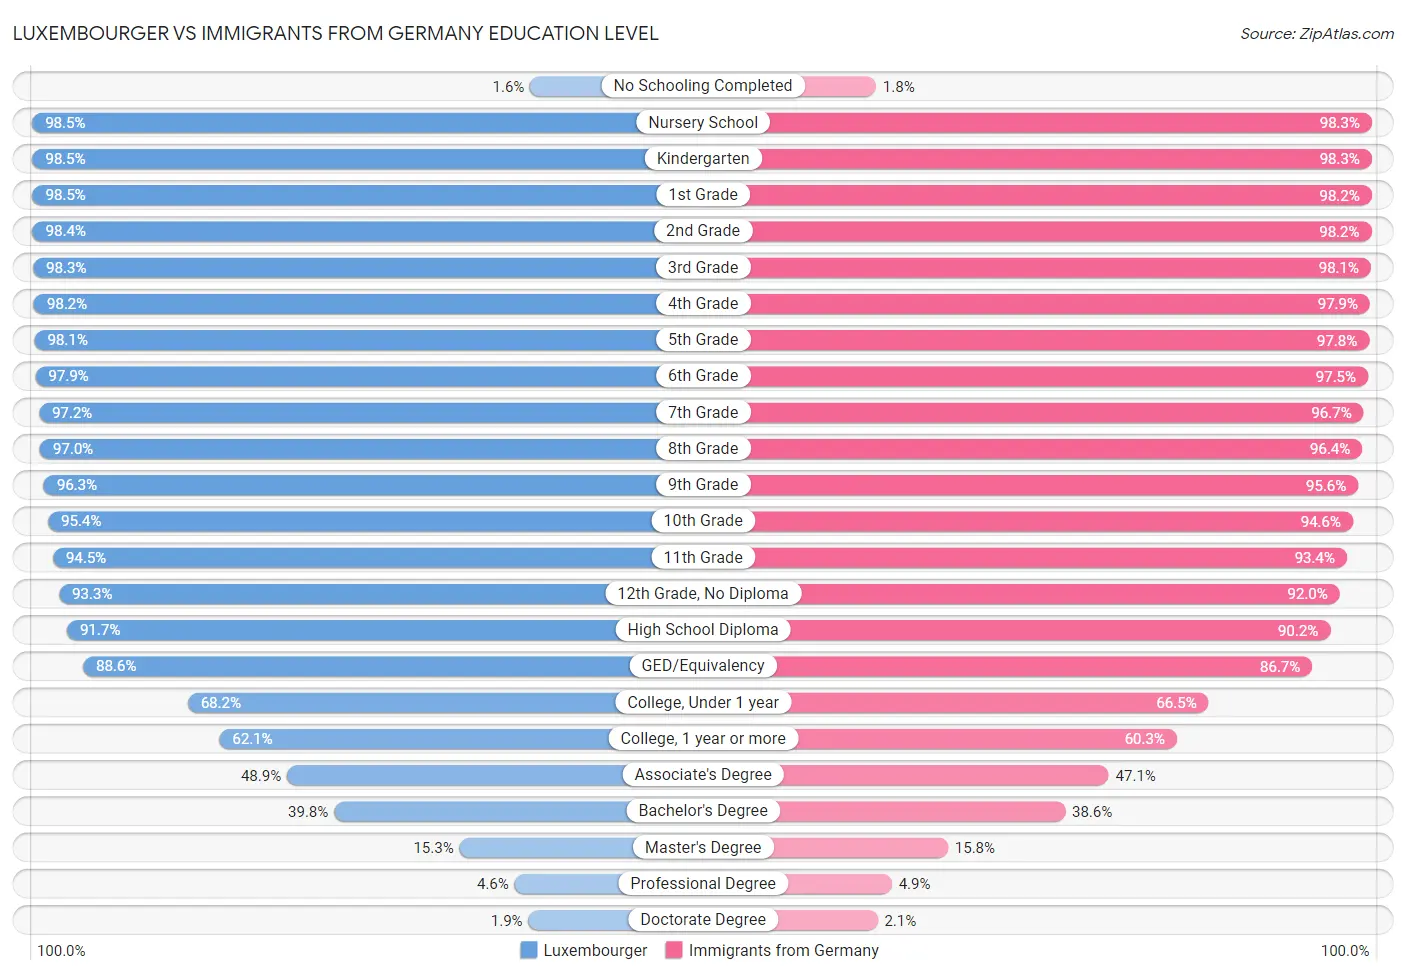 Luxembourger vs Immigrants from Germany Education Level